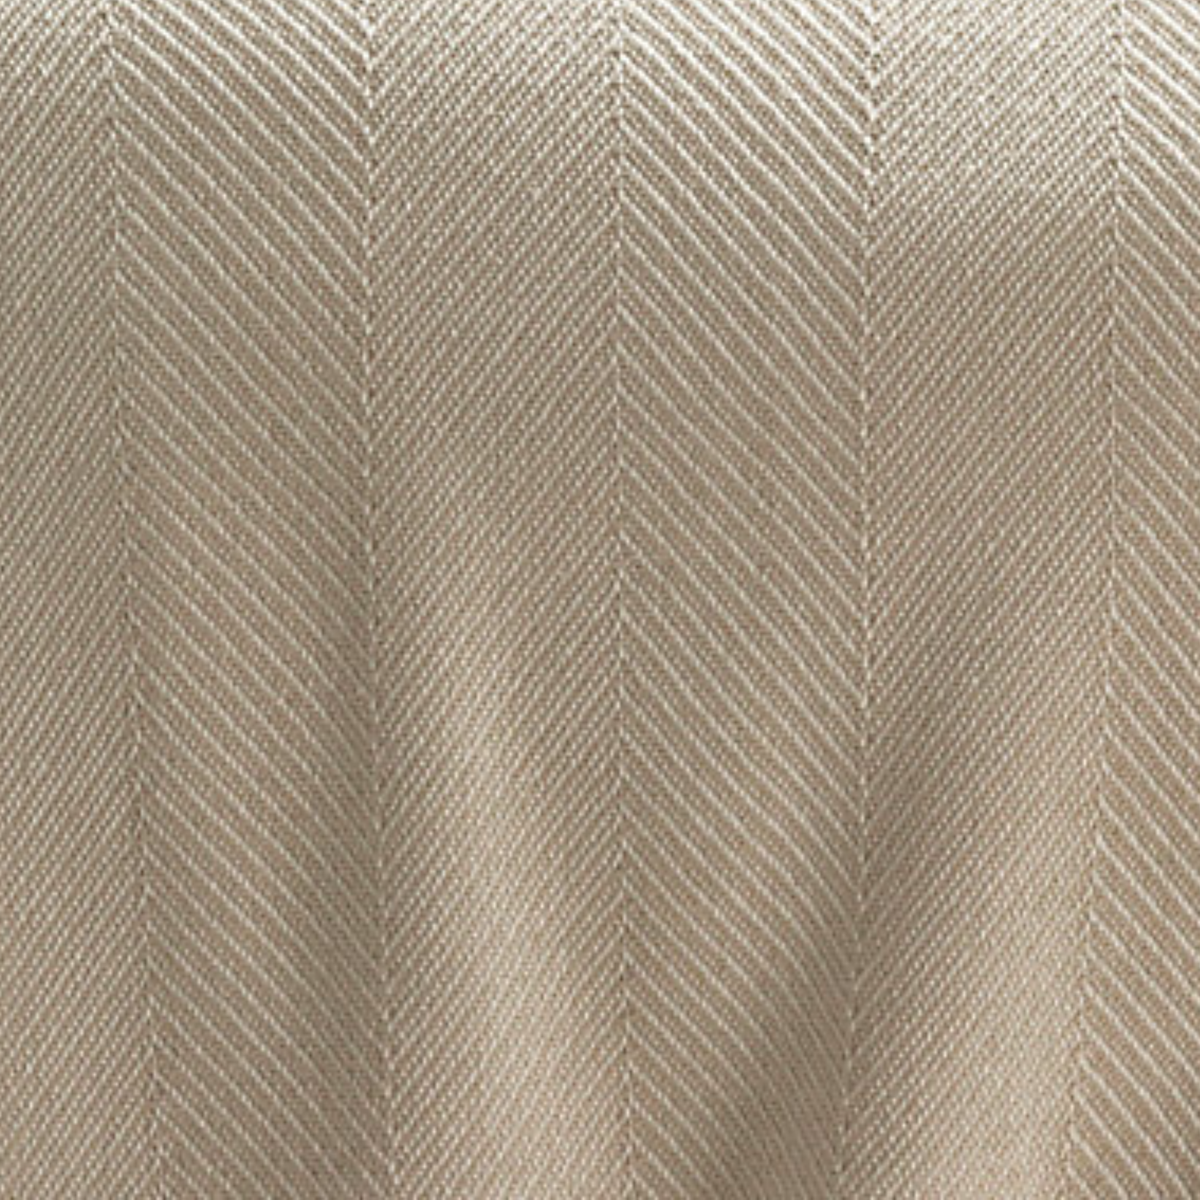 Swatch Sample of Pine Cone Hill Herringbone Blanket in White/Ivory Color